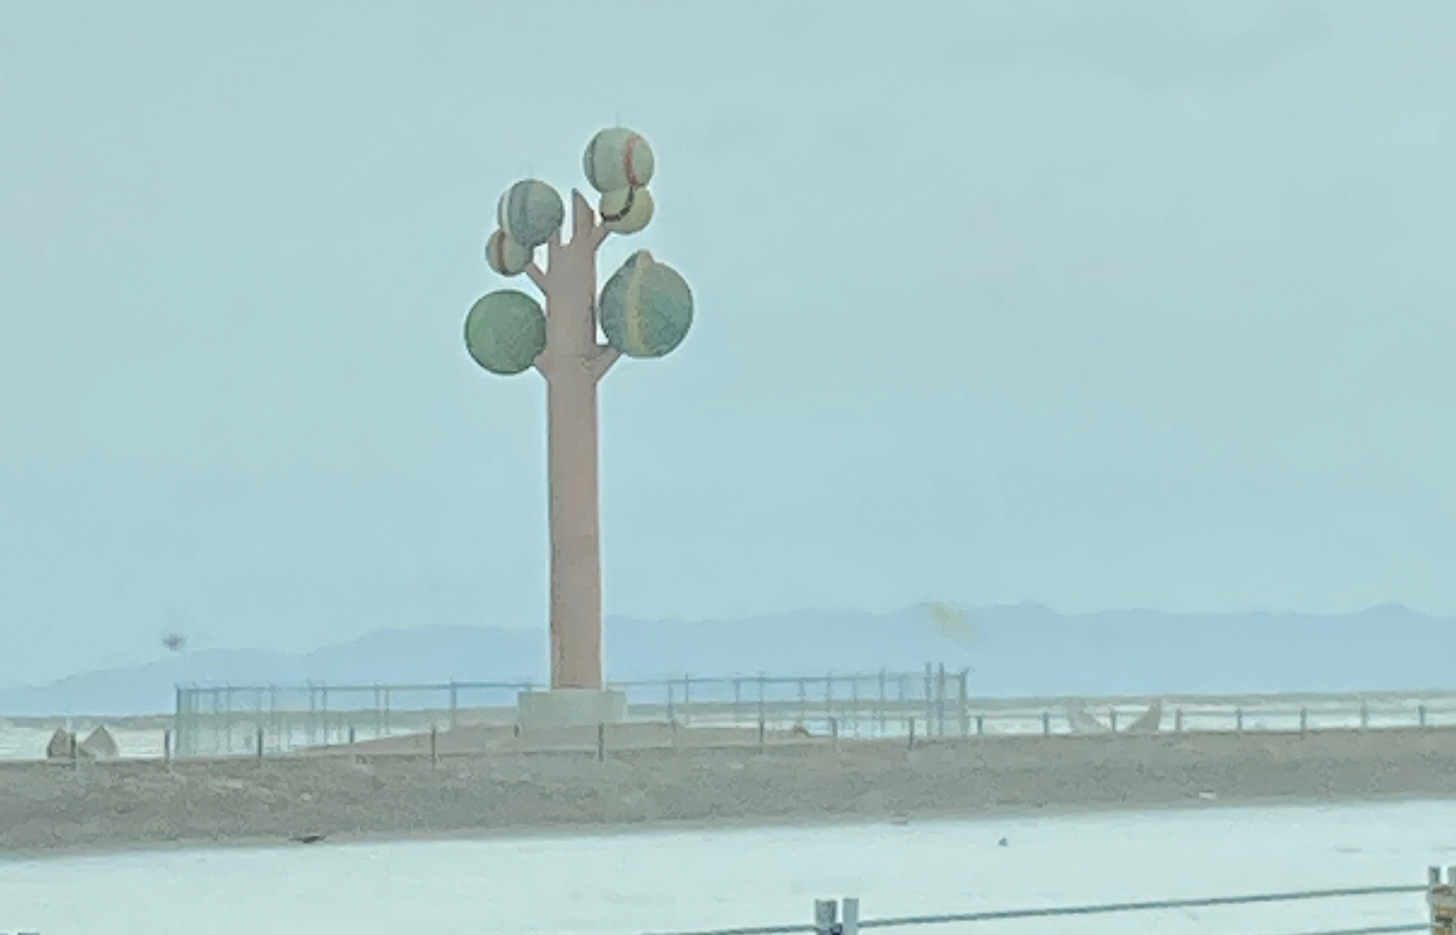 An art installation on the side of Highway 80 that looks like a giant cardboard tree, with a brown trunk and various balls (tennis, etc) for leaves.